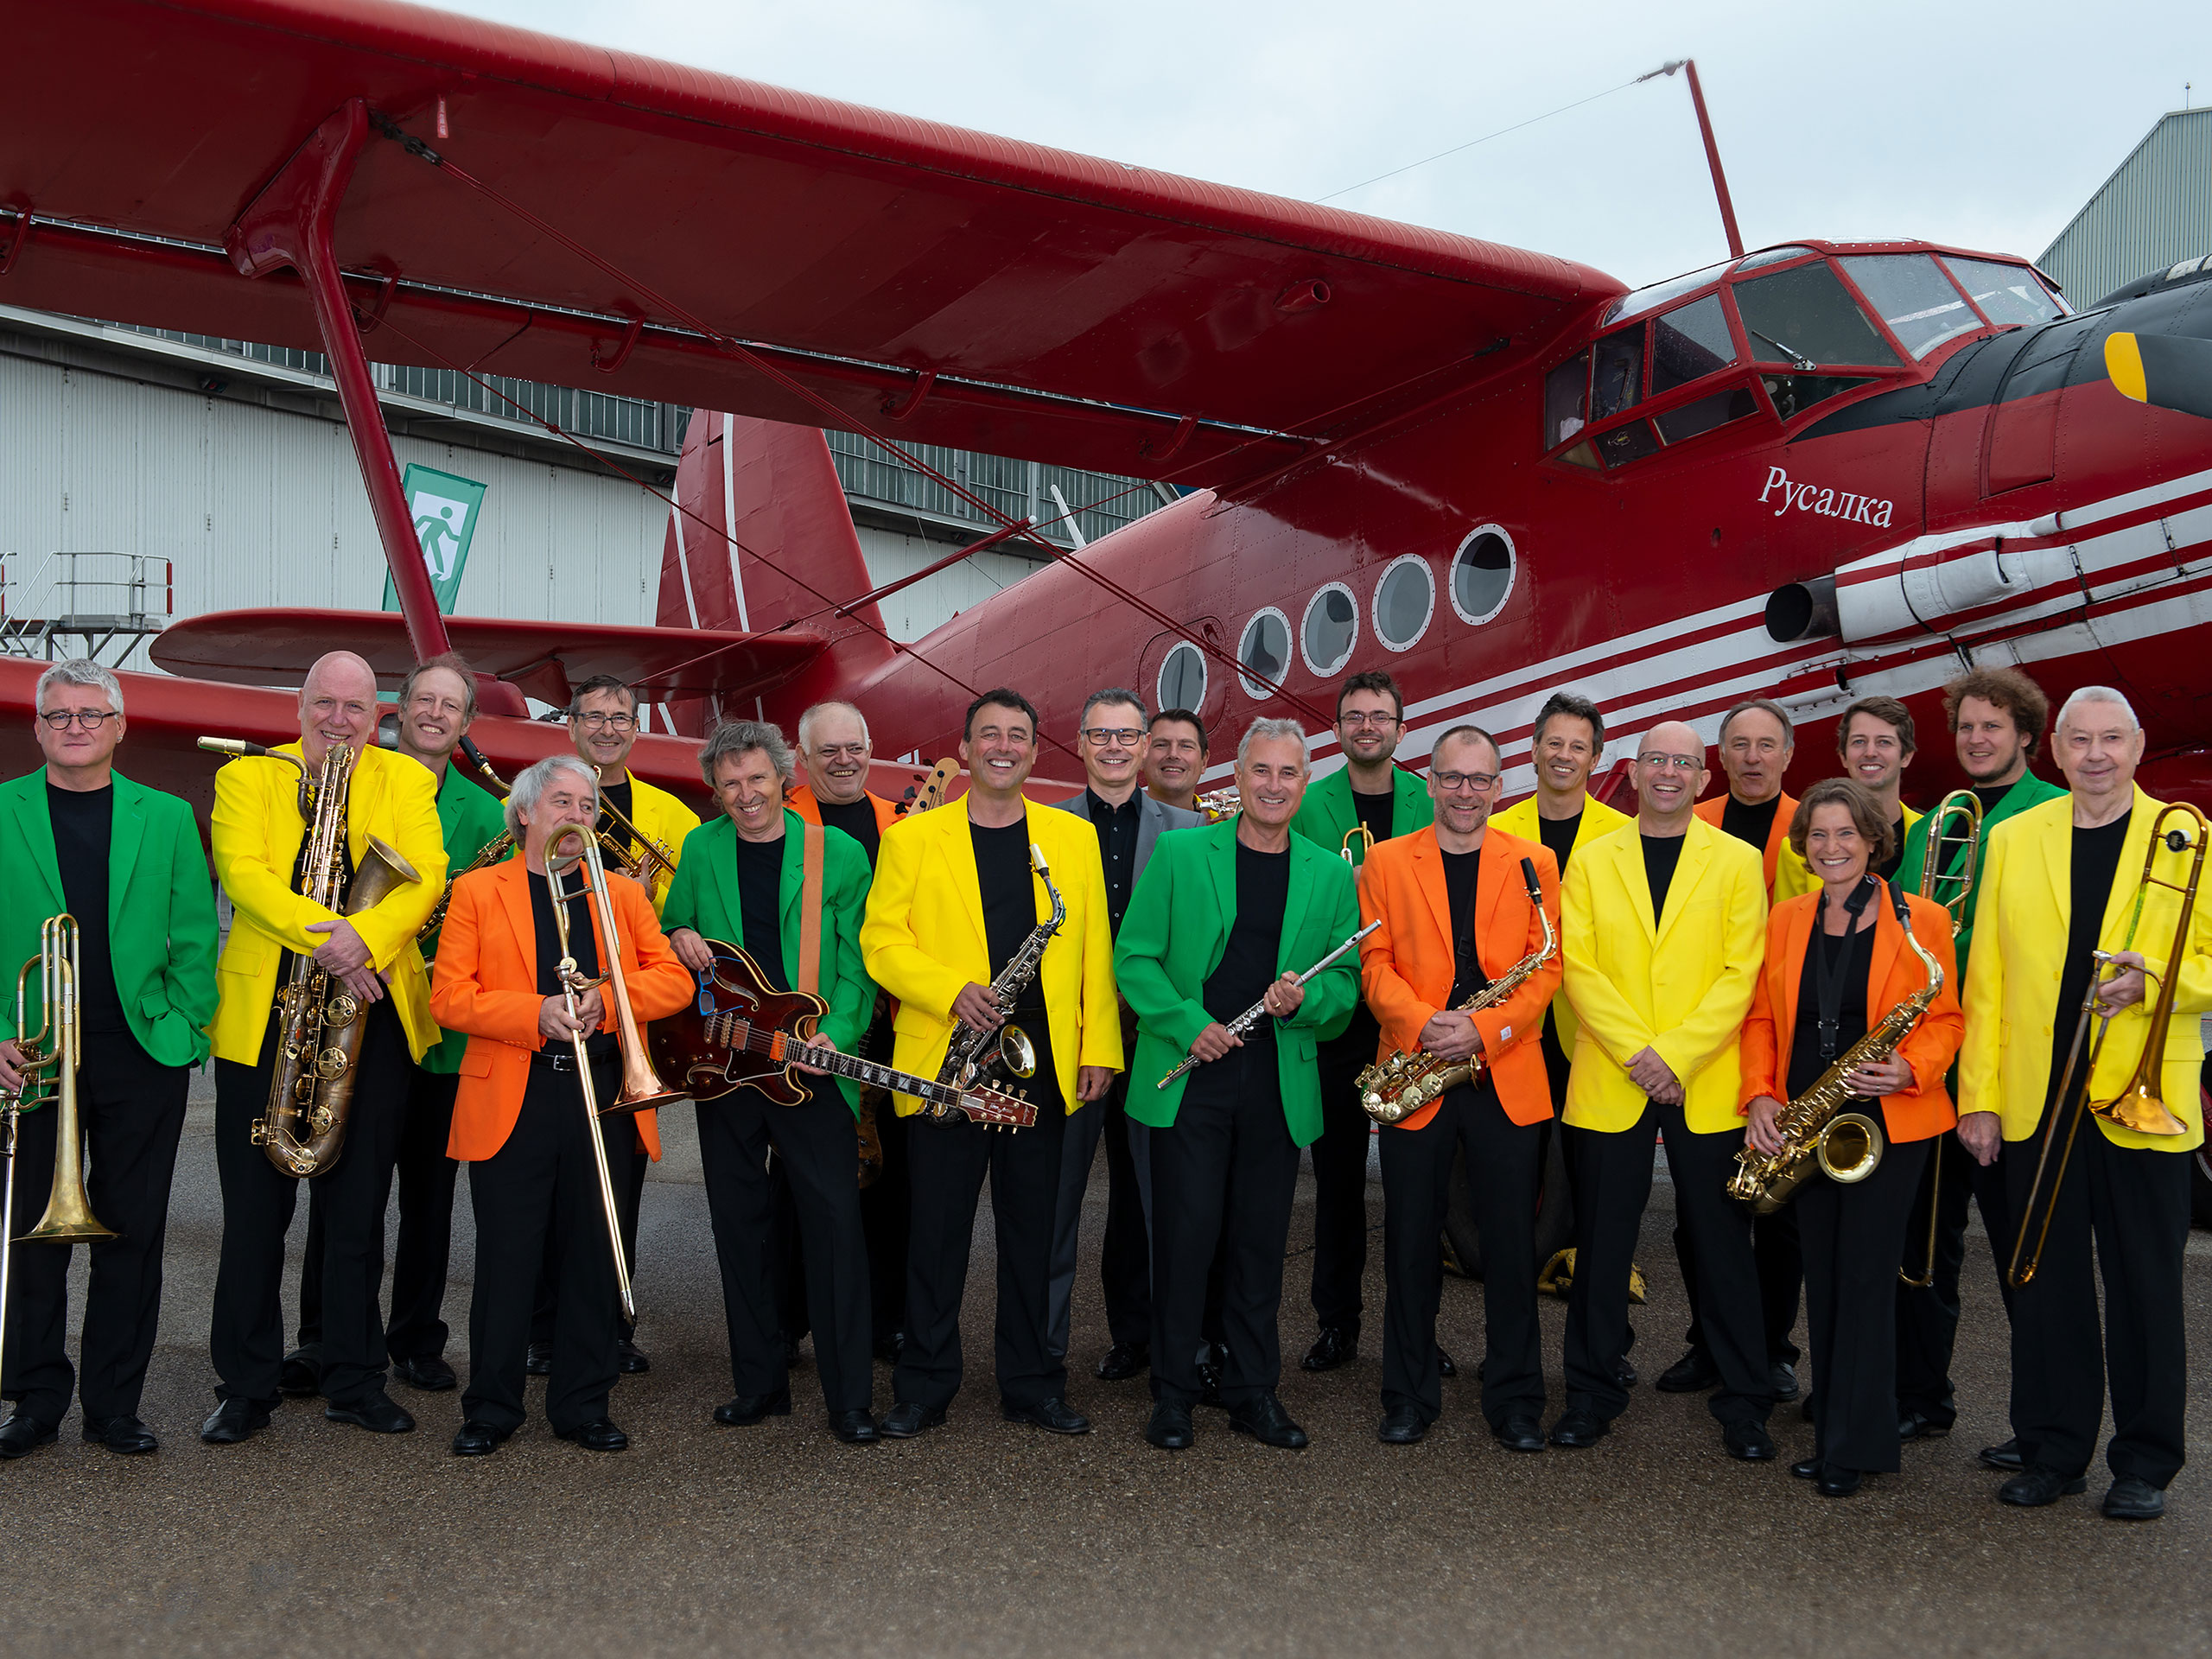 Orchestra in front of an airplane.